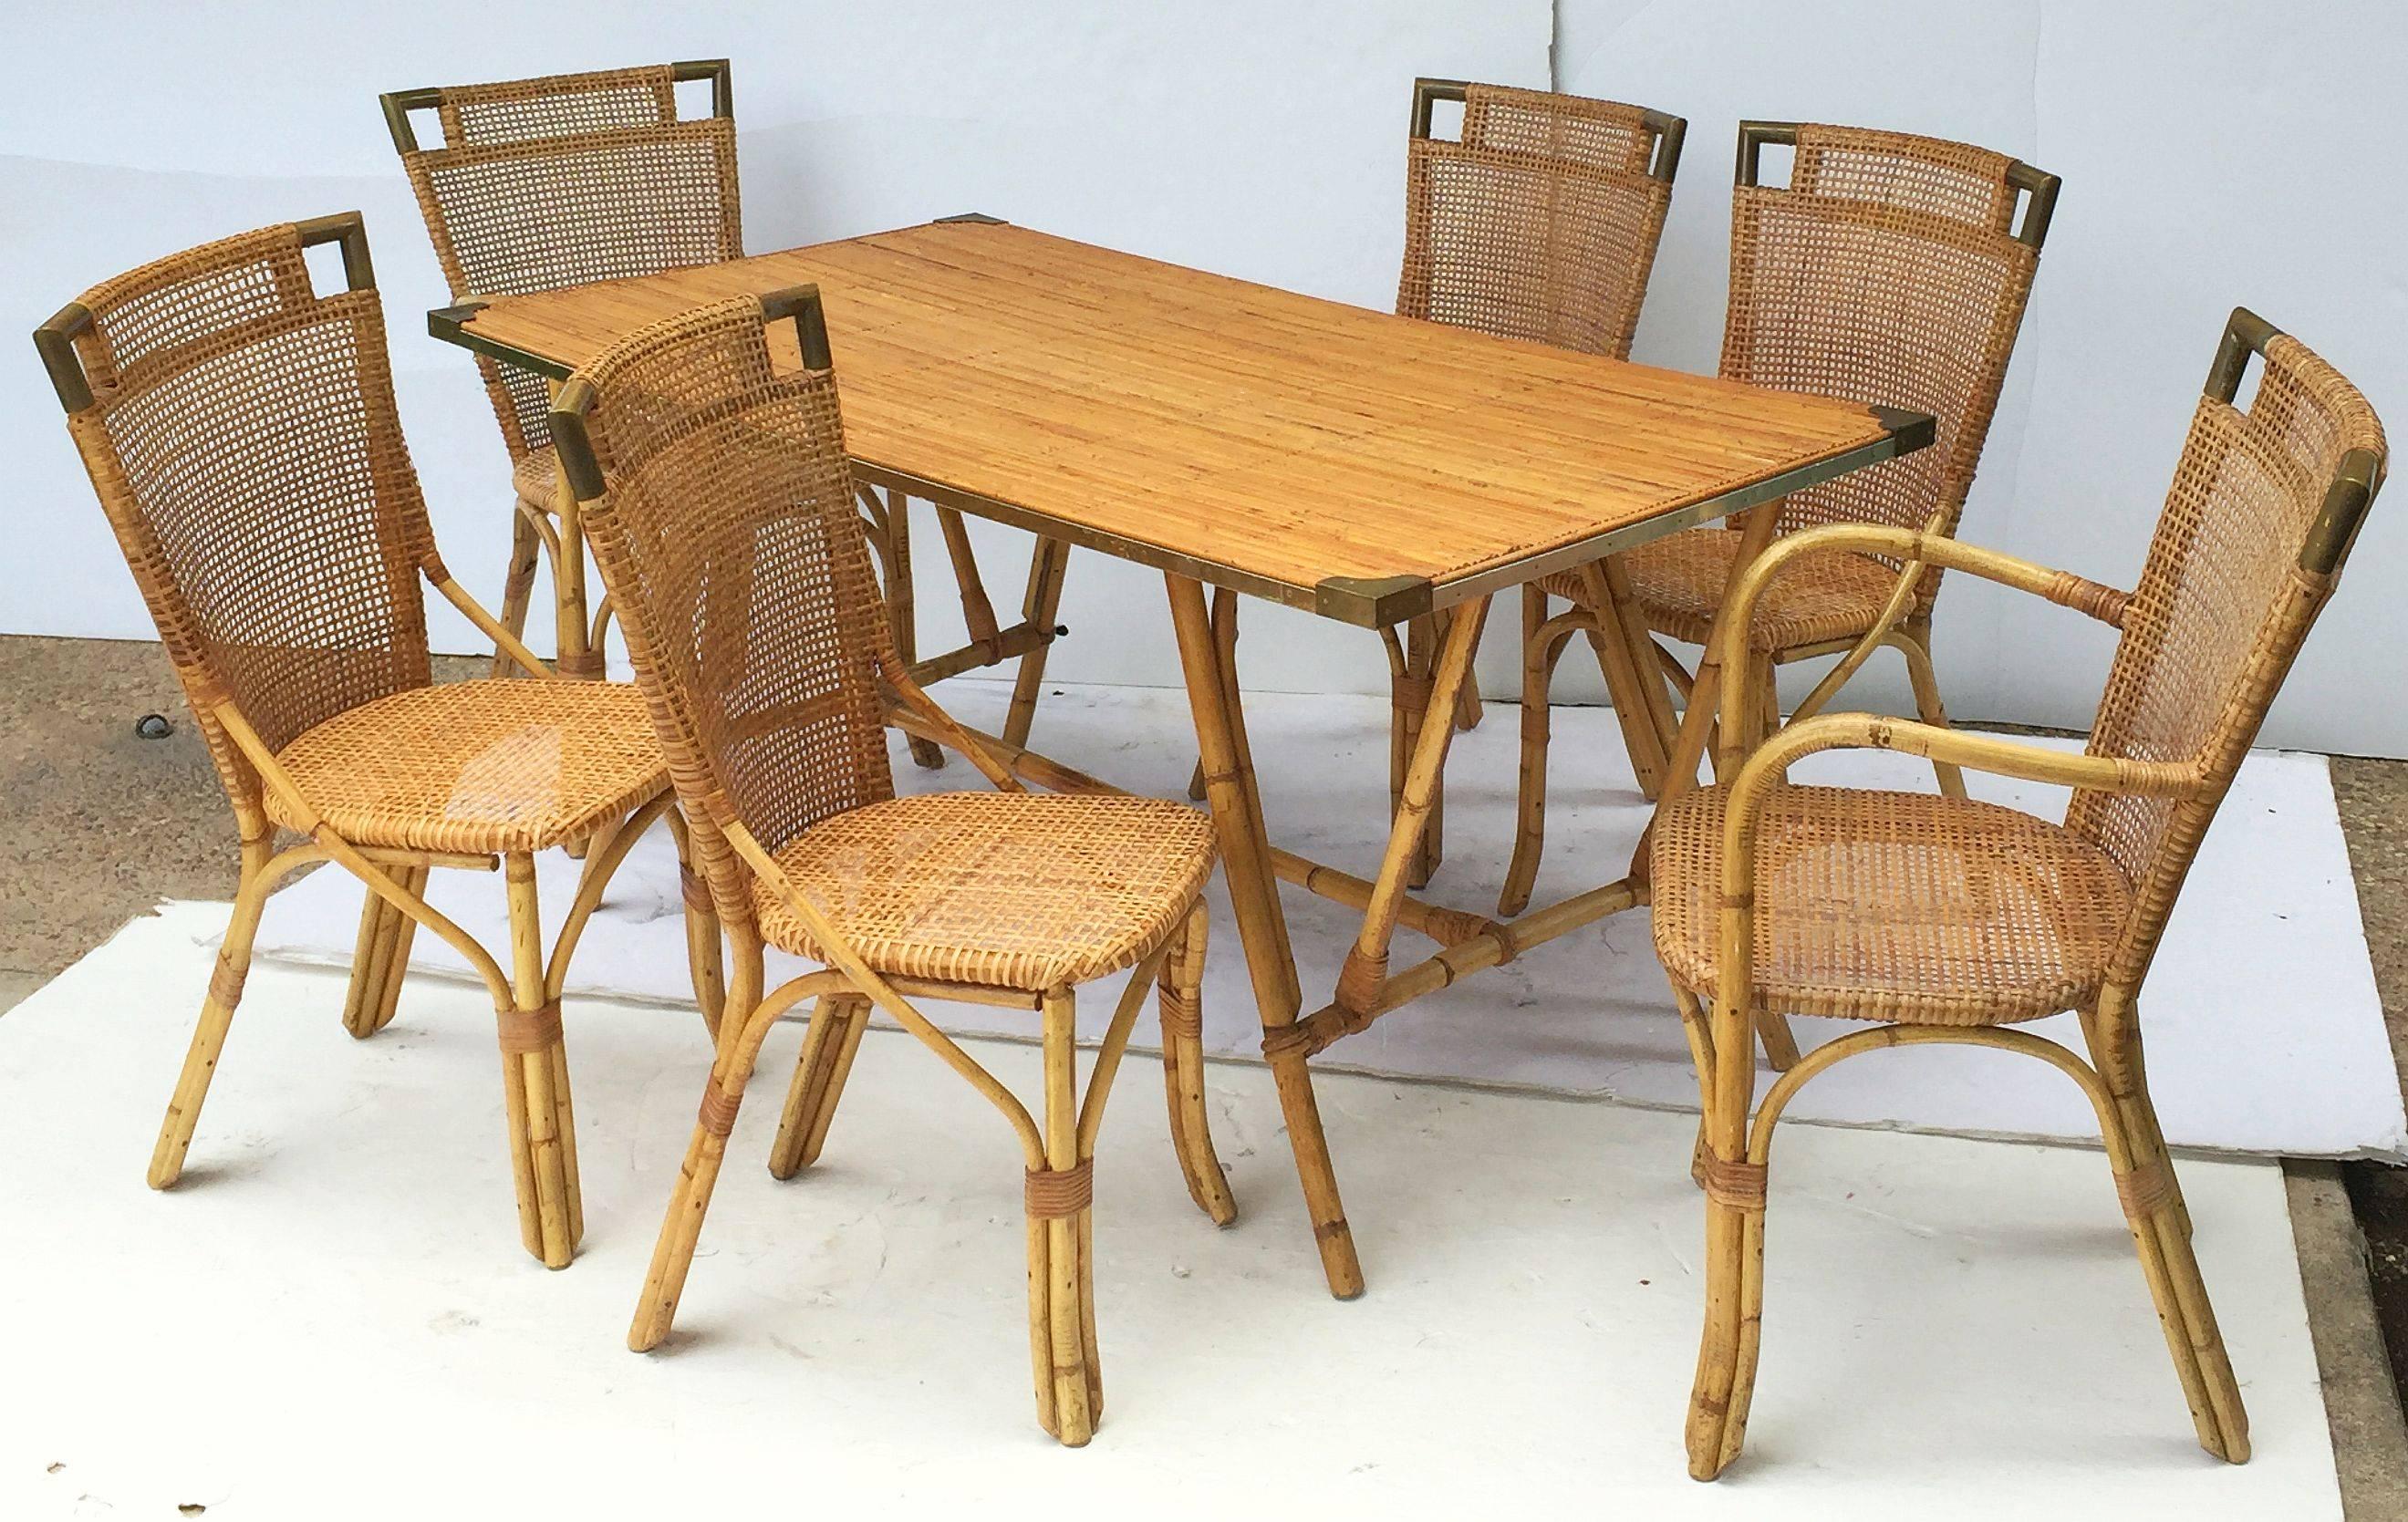 bamboo tables and chairs